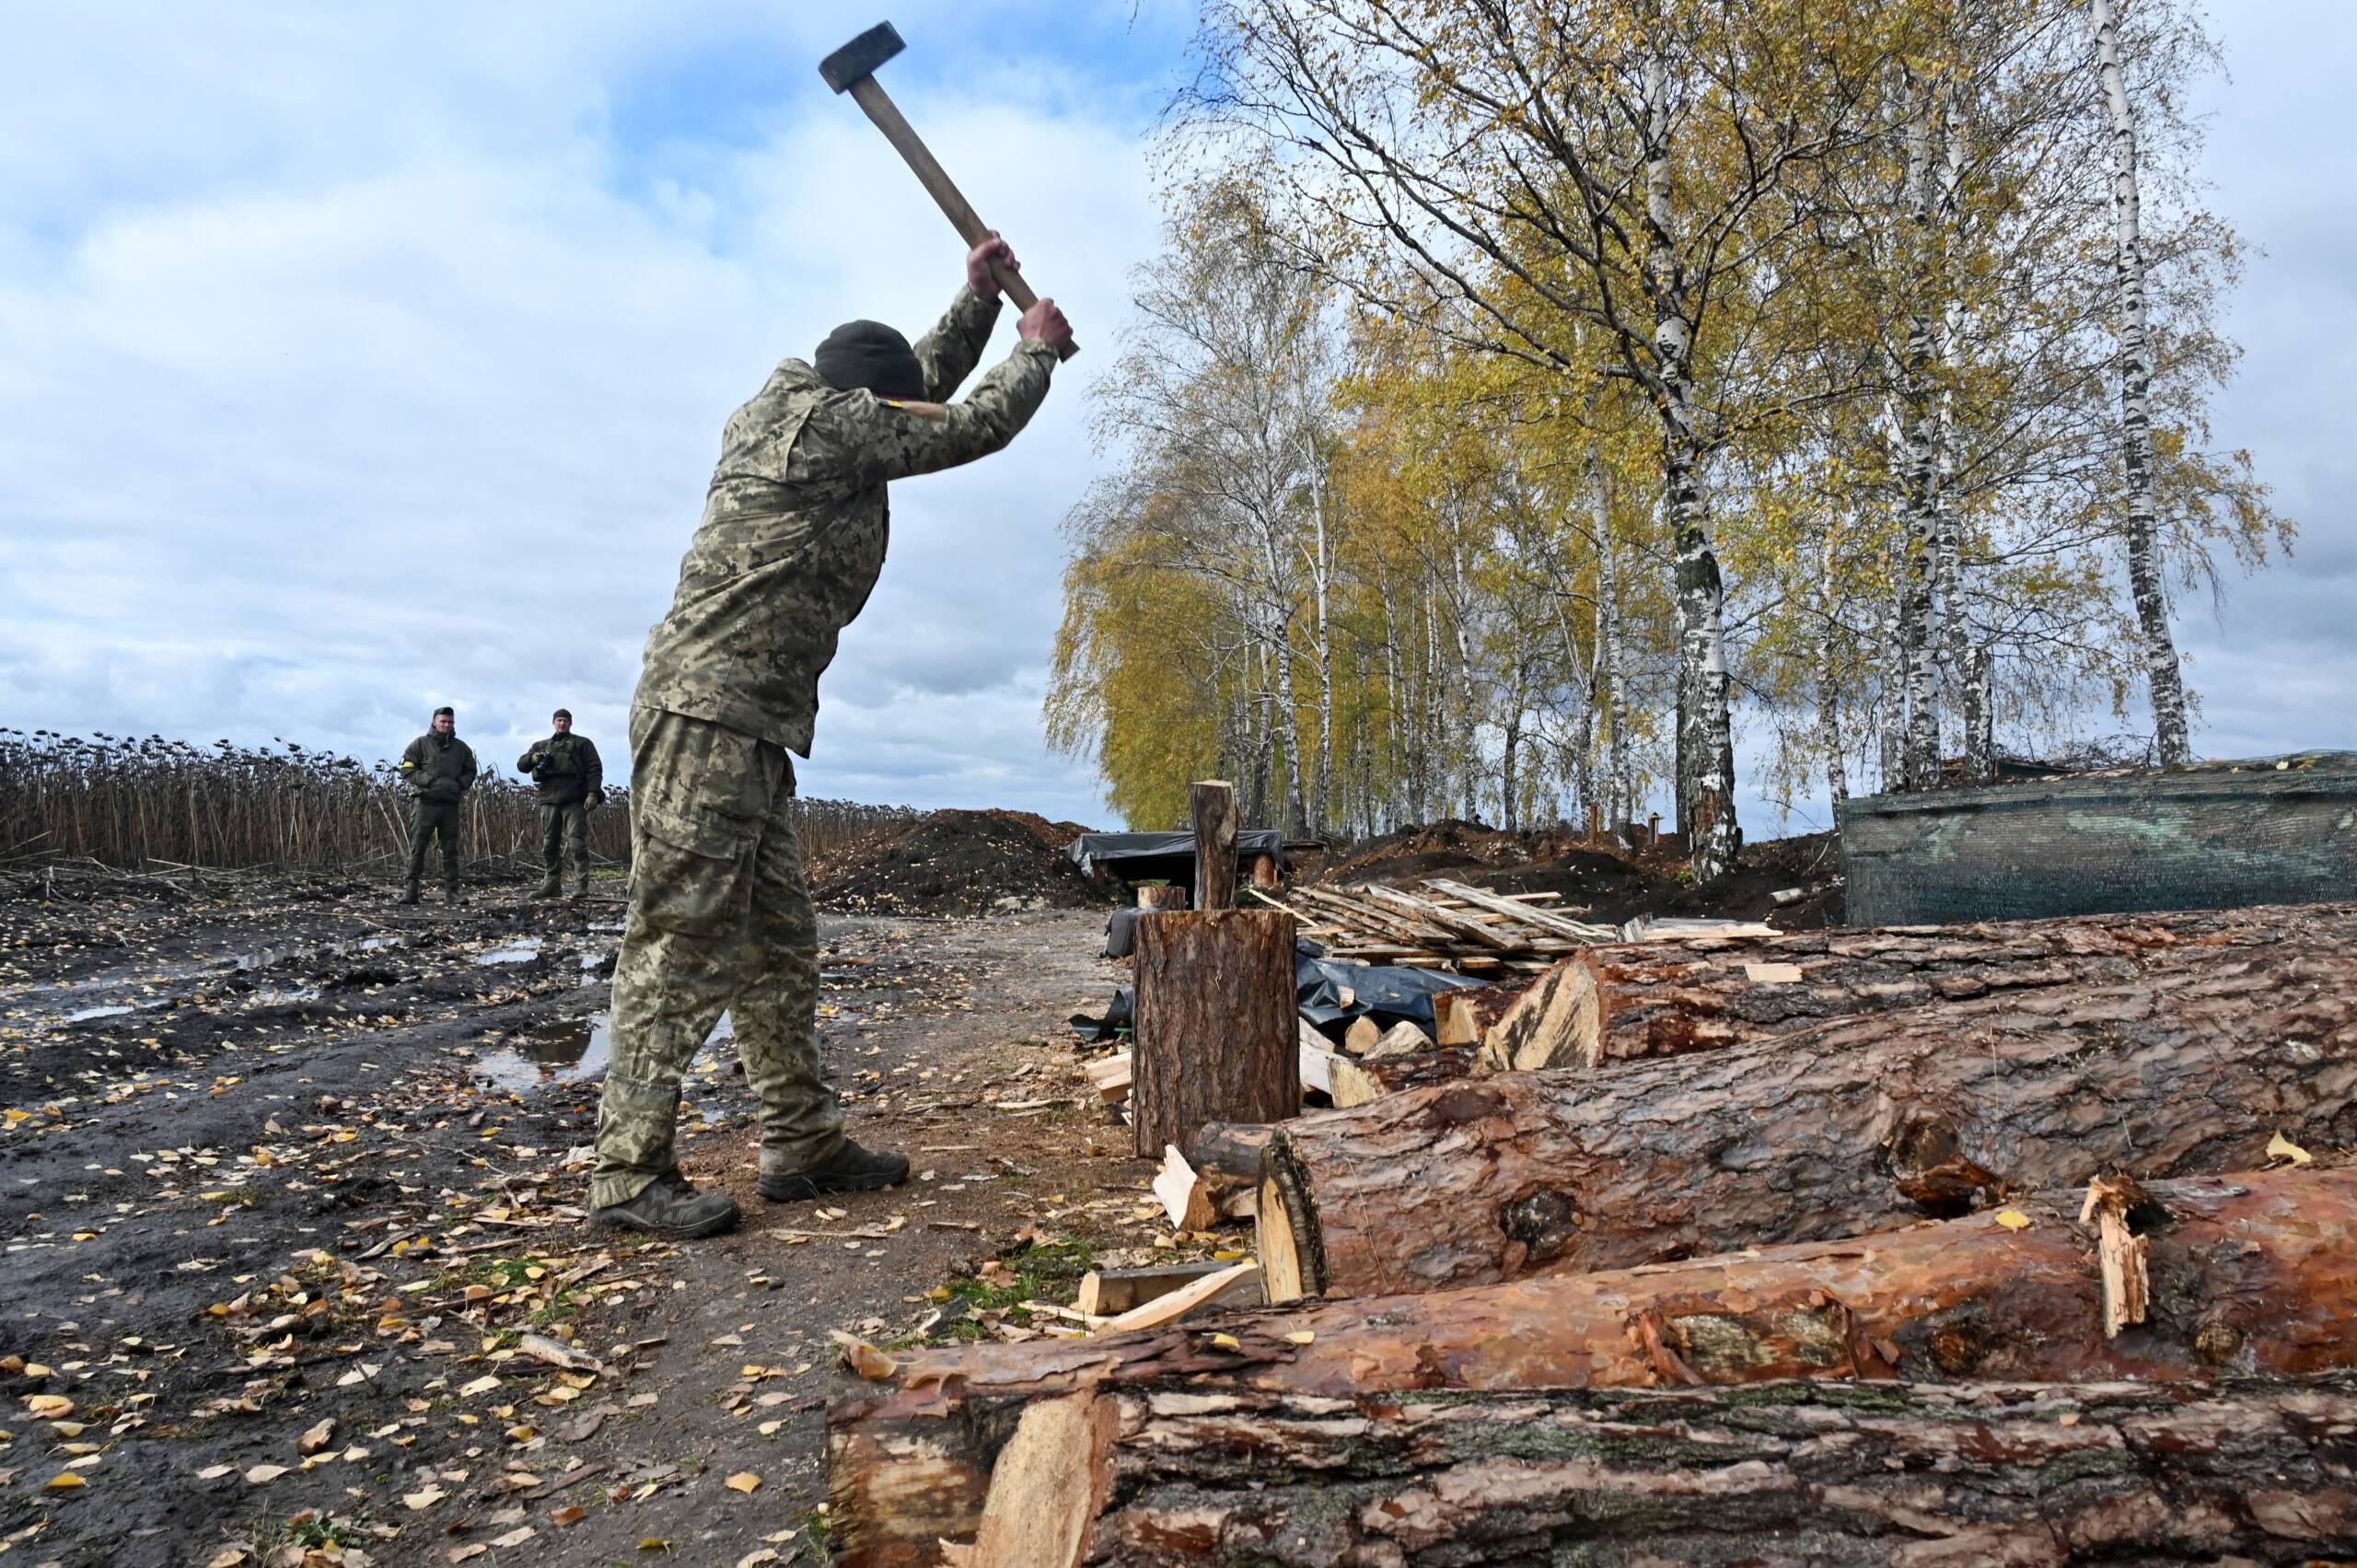 A soldier of the National Guard of Ukraine chops firewood in the northern occupied territories of Kharkiv region on October 21, 2022, amid the Russian military invasion of Ukraine. (Photo by SERGEY BOBOK / AFP)